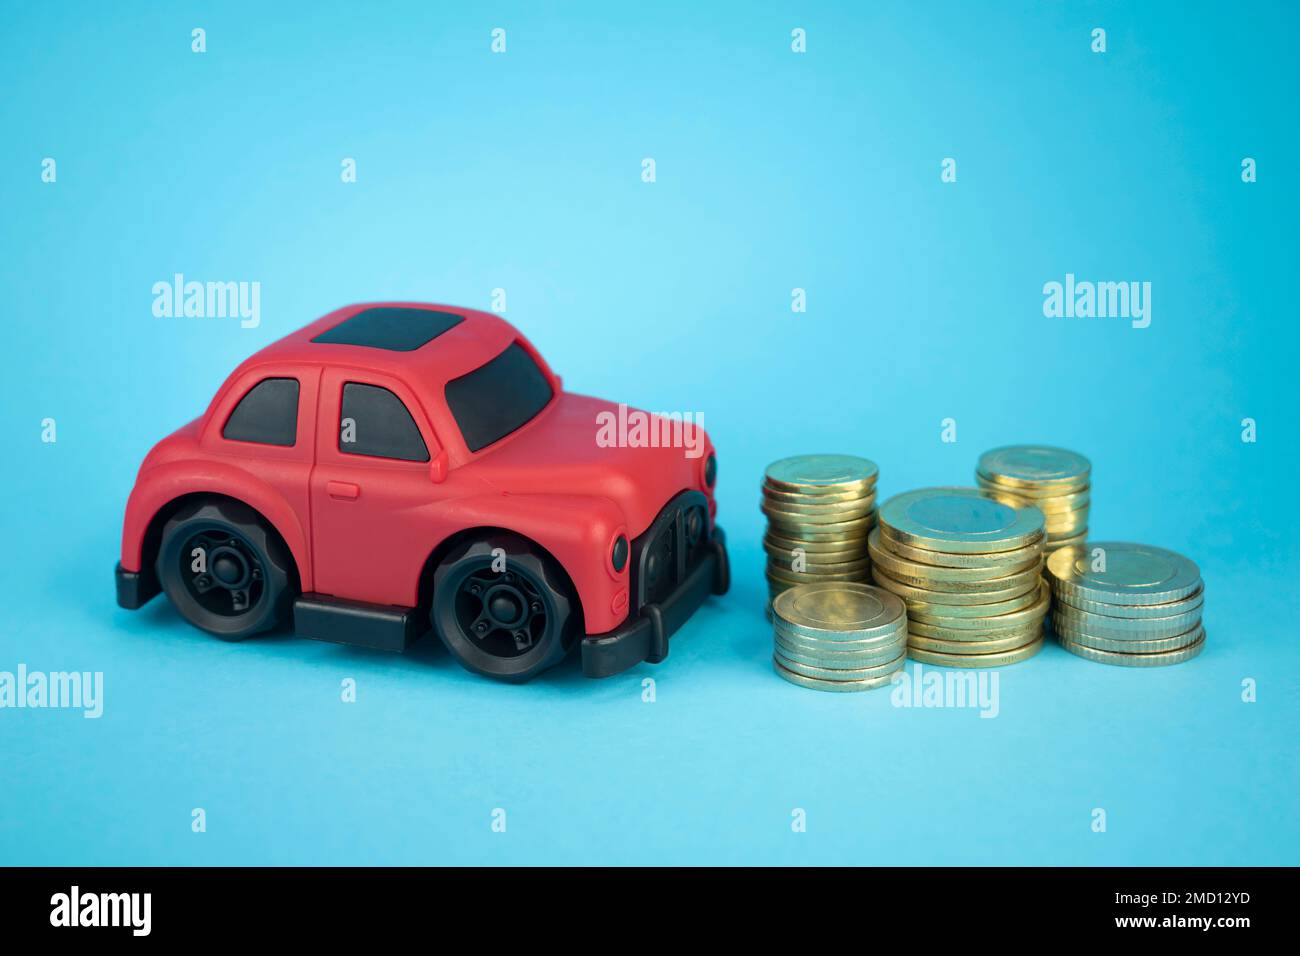 Toy car and coins on an isolated blue background Stock Photo